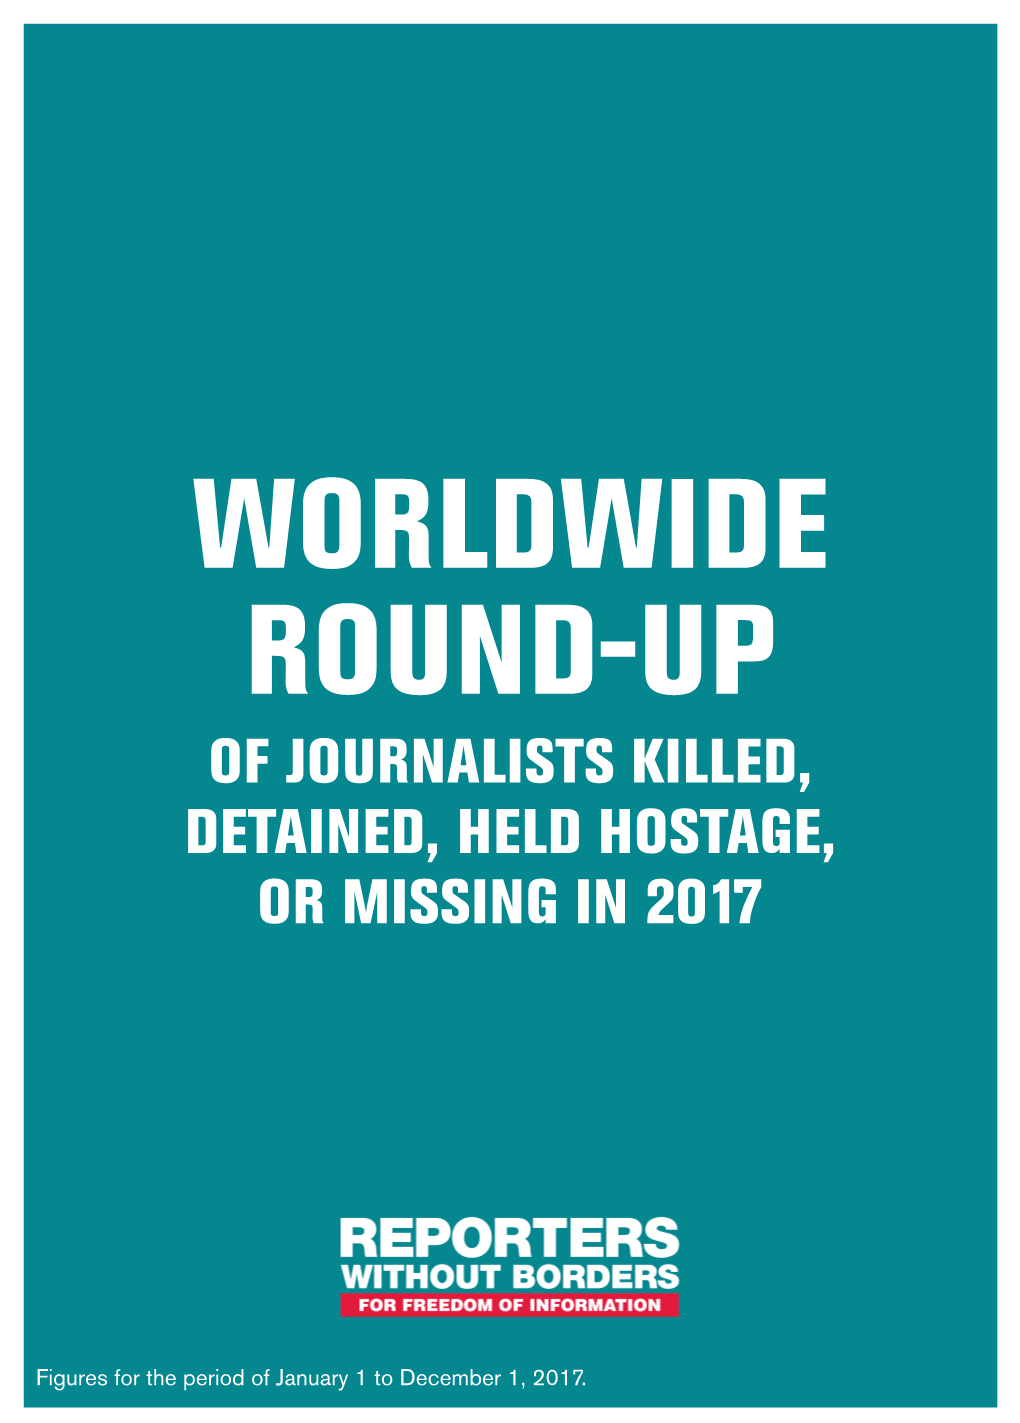 Of Journalists Killed, Detained, Held Hostage, Or Missing in 2017